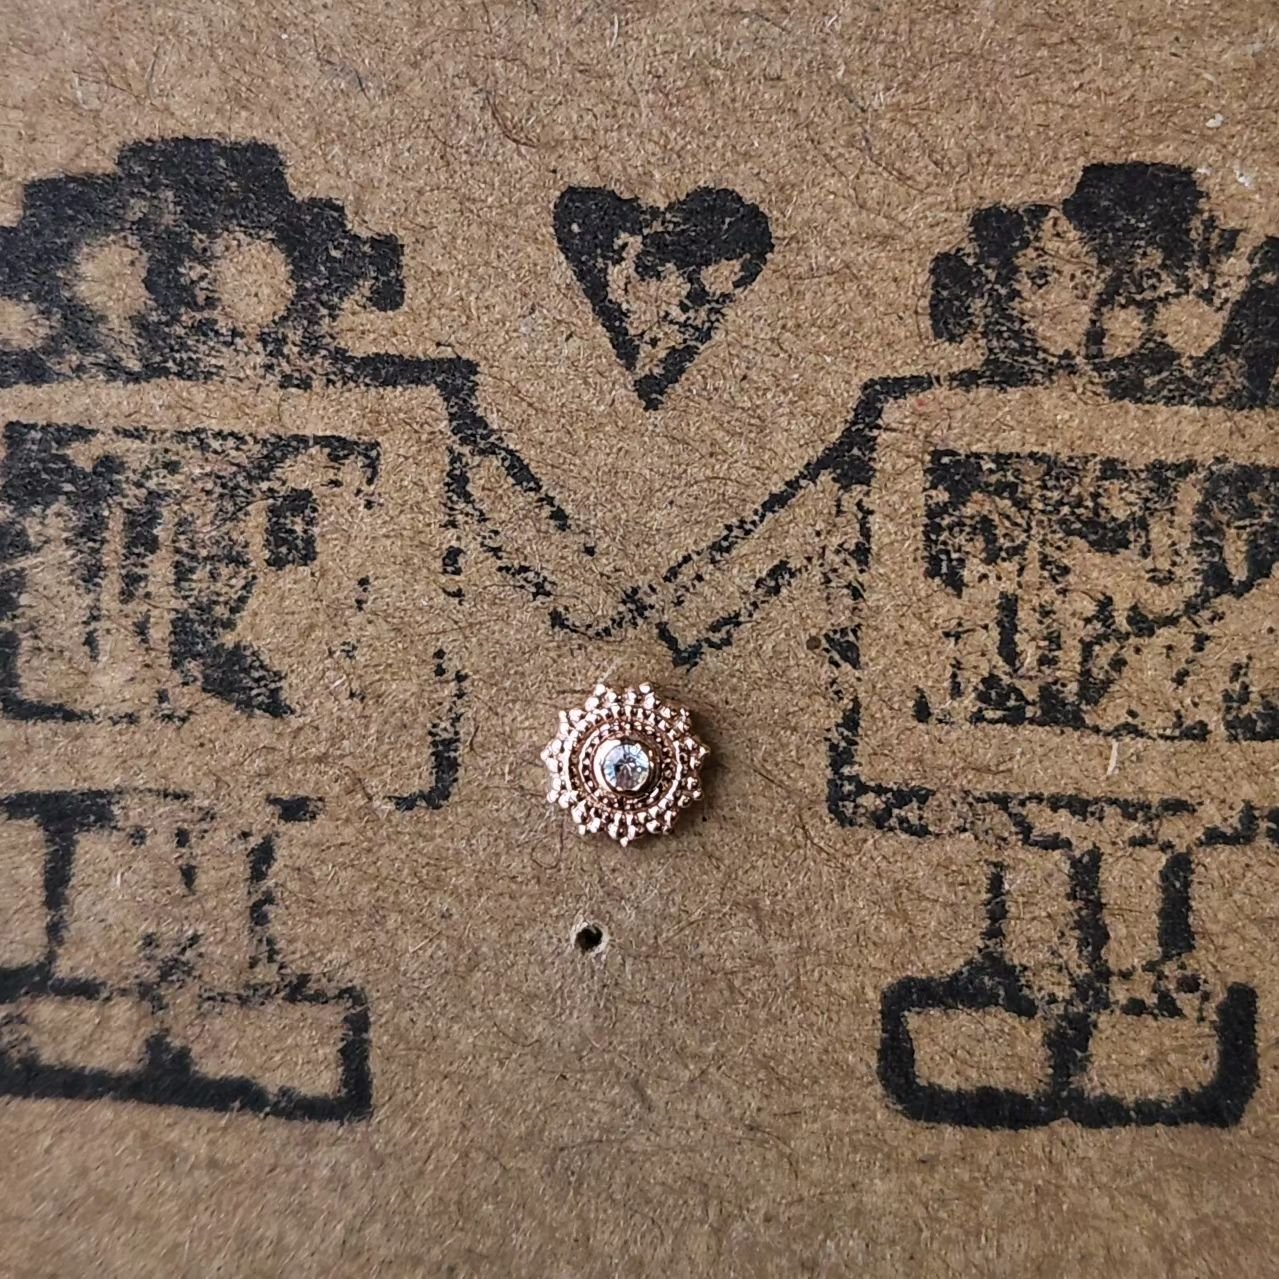 We just got a big Afghan restock from BVLA!
Get em while they're hot!
🌟💗🤖
#robotbabes #robotpiercingtattoo #robotarmy #bvla #portlandpiercing #professionalpiercing #gold #goldends #qualitybodyjewelry #legitbodyjewelry #Afghan #Portland #nwportland